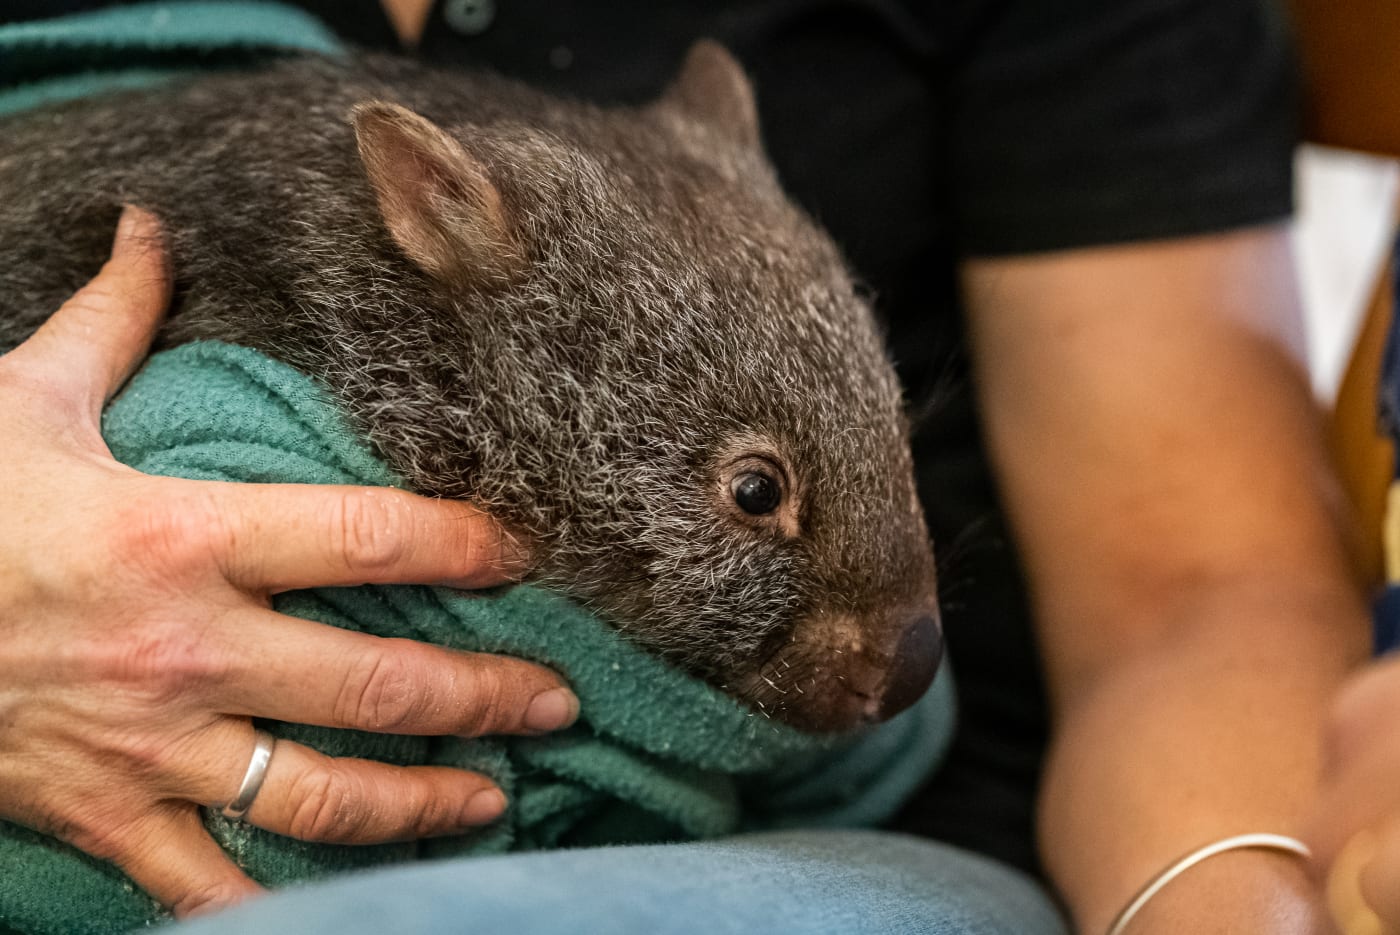 An injured wombat that suffered burns and a collapsed lung due to smoke inhalation from the bushfires in care with Wildcare in Carwoola, NSW.